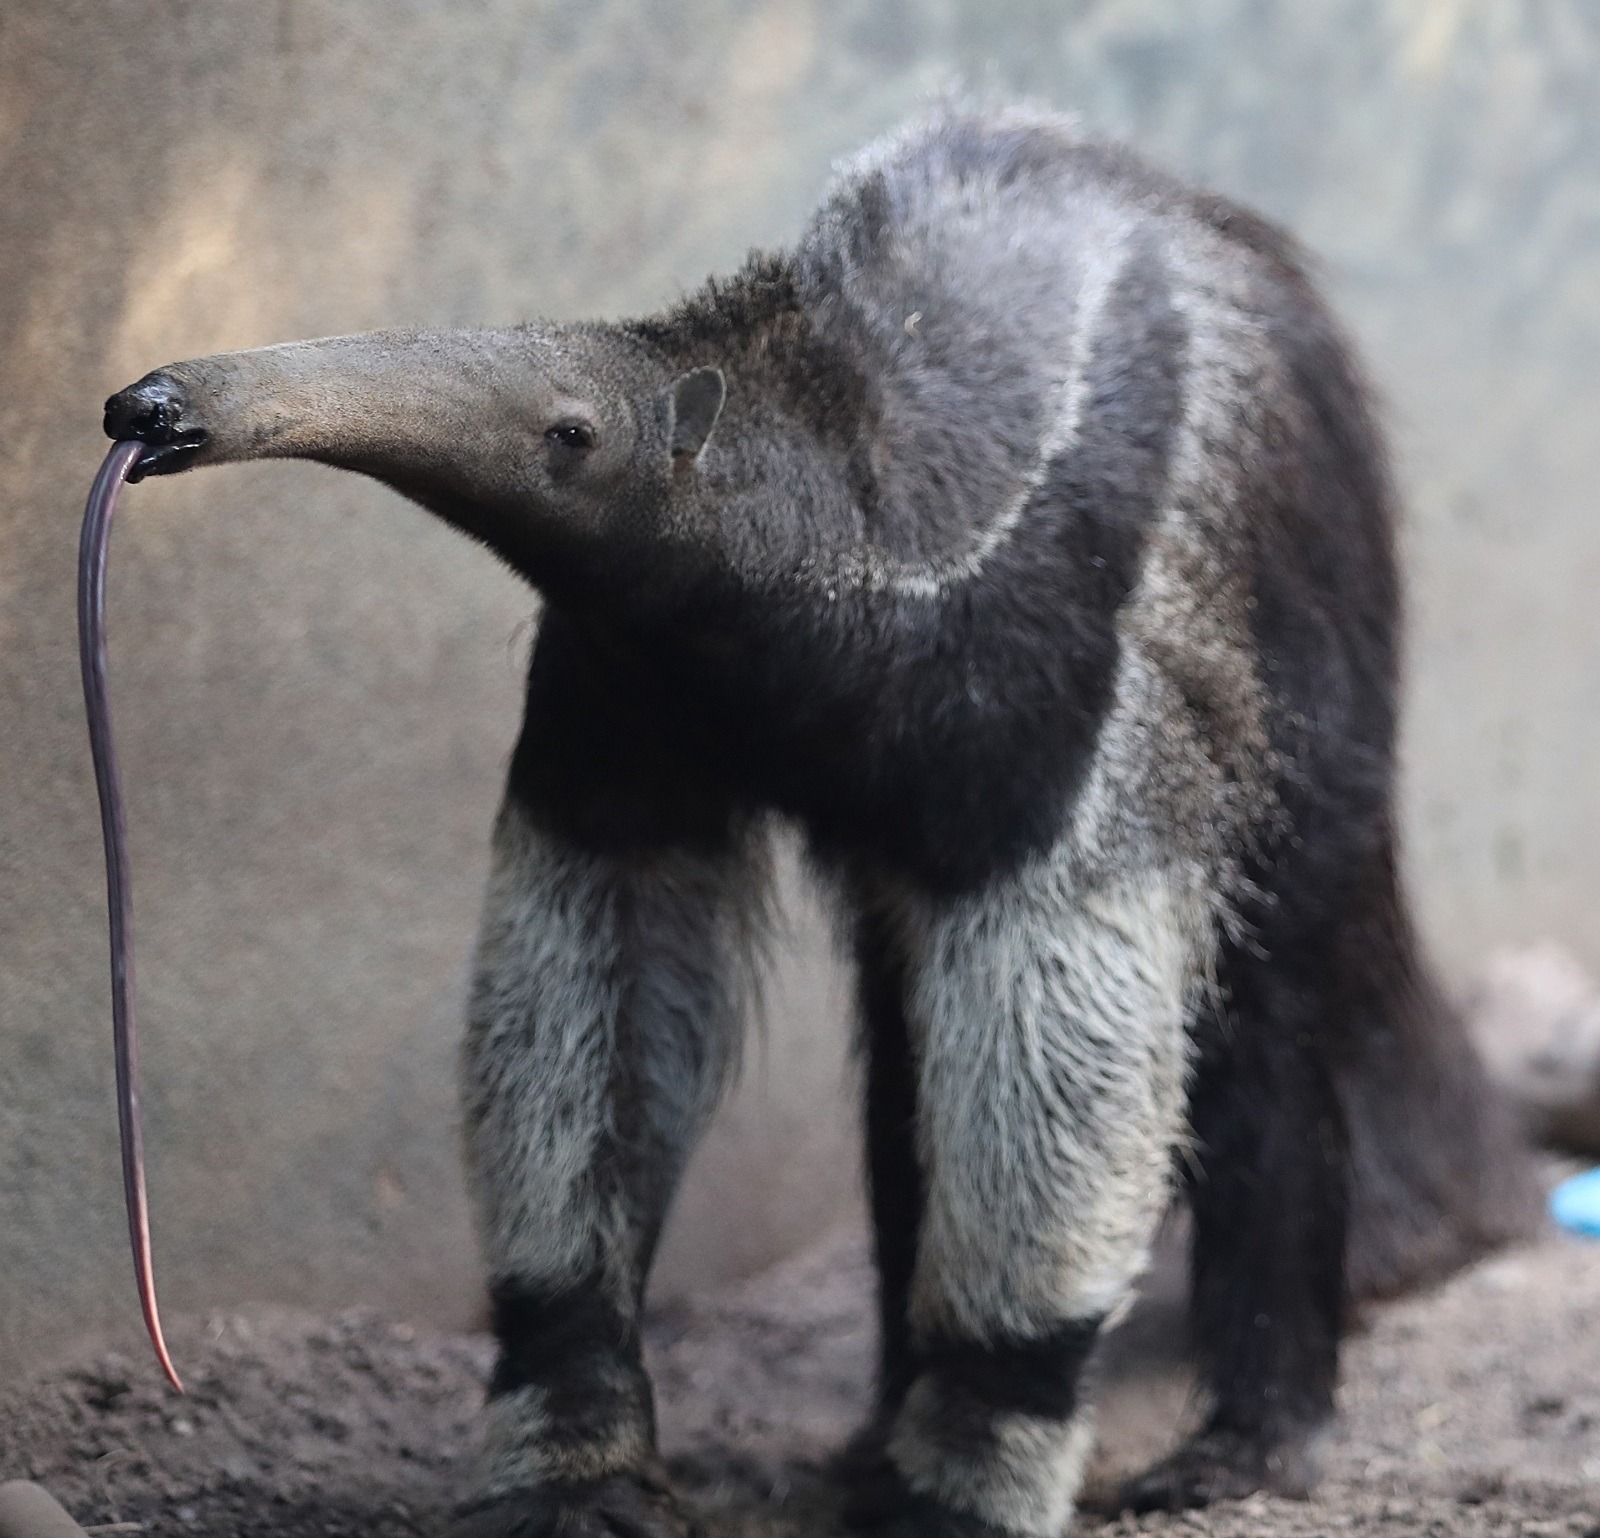 Don't Get Bit — Noodle tongue![[MORE]] The giant anteater ...